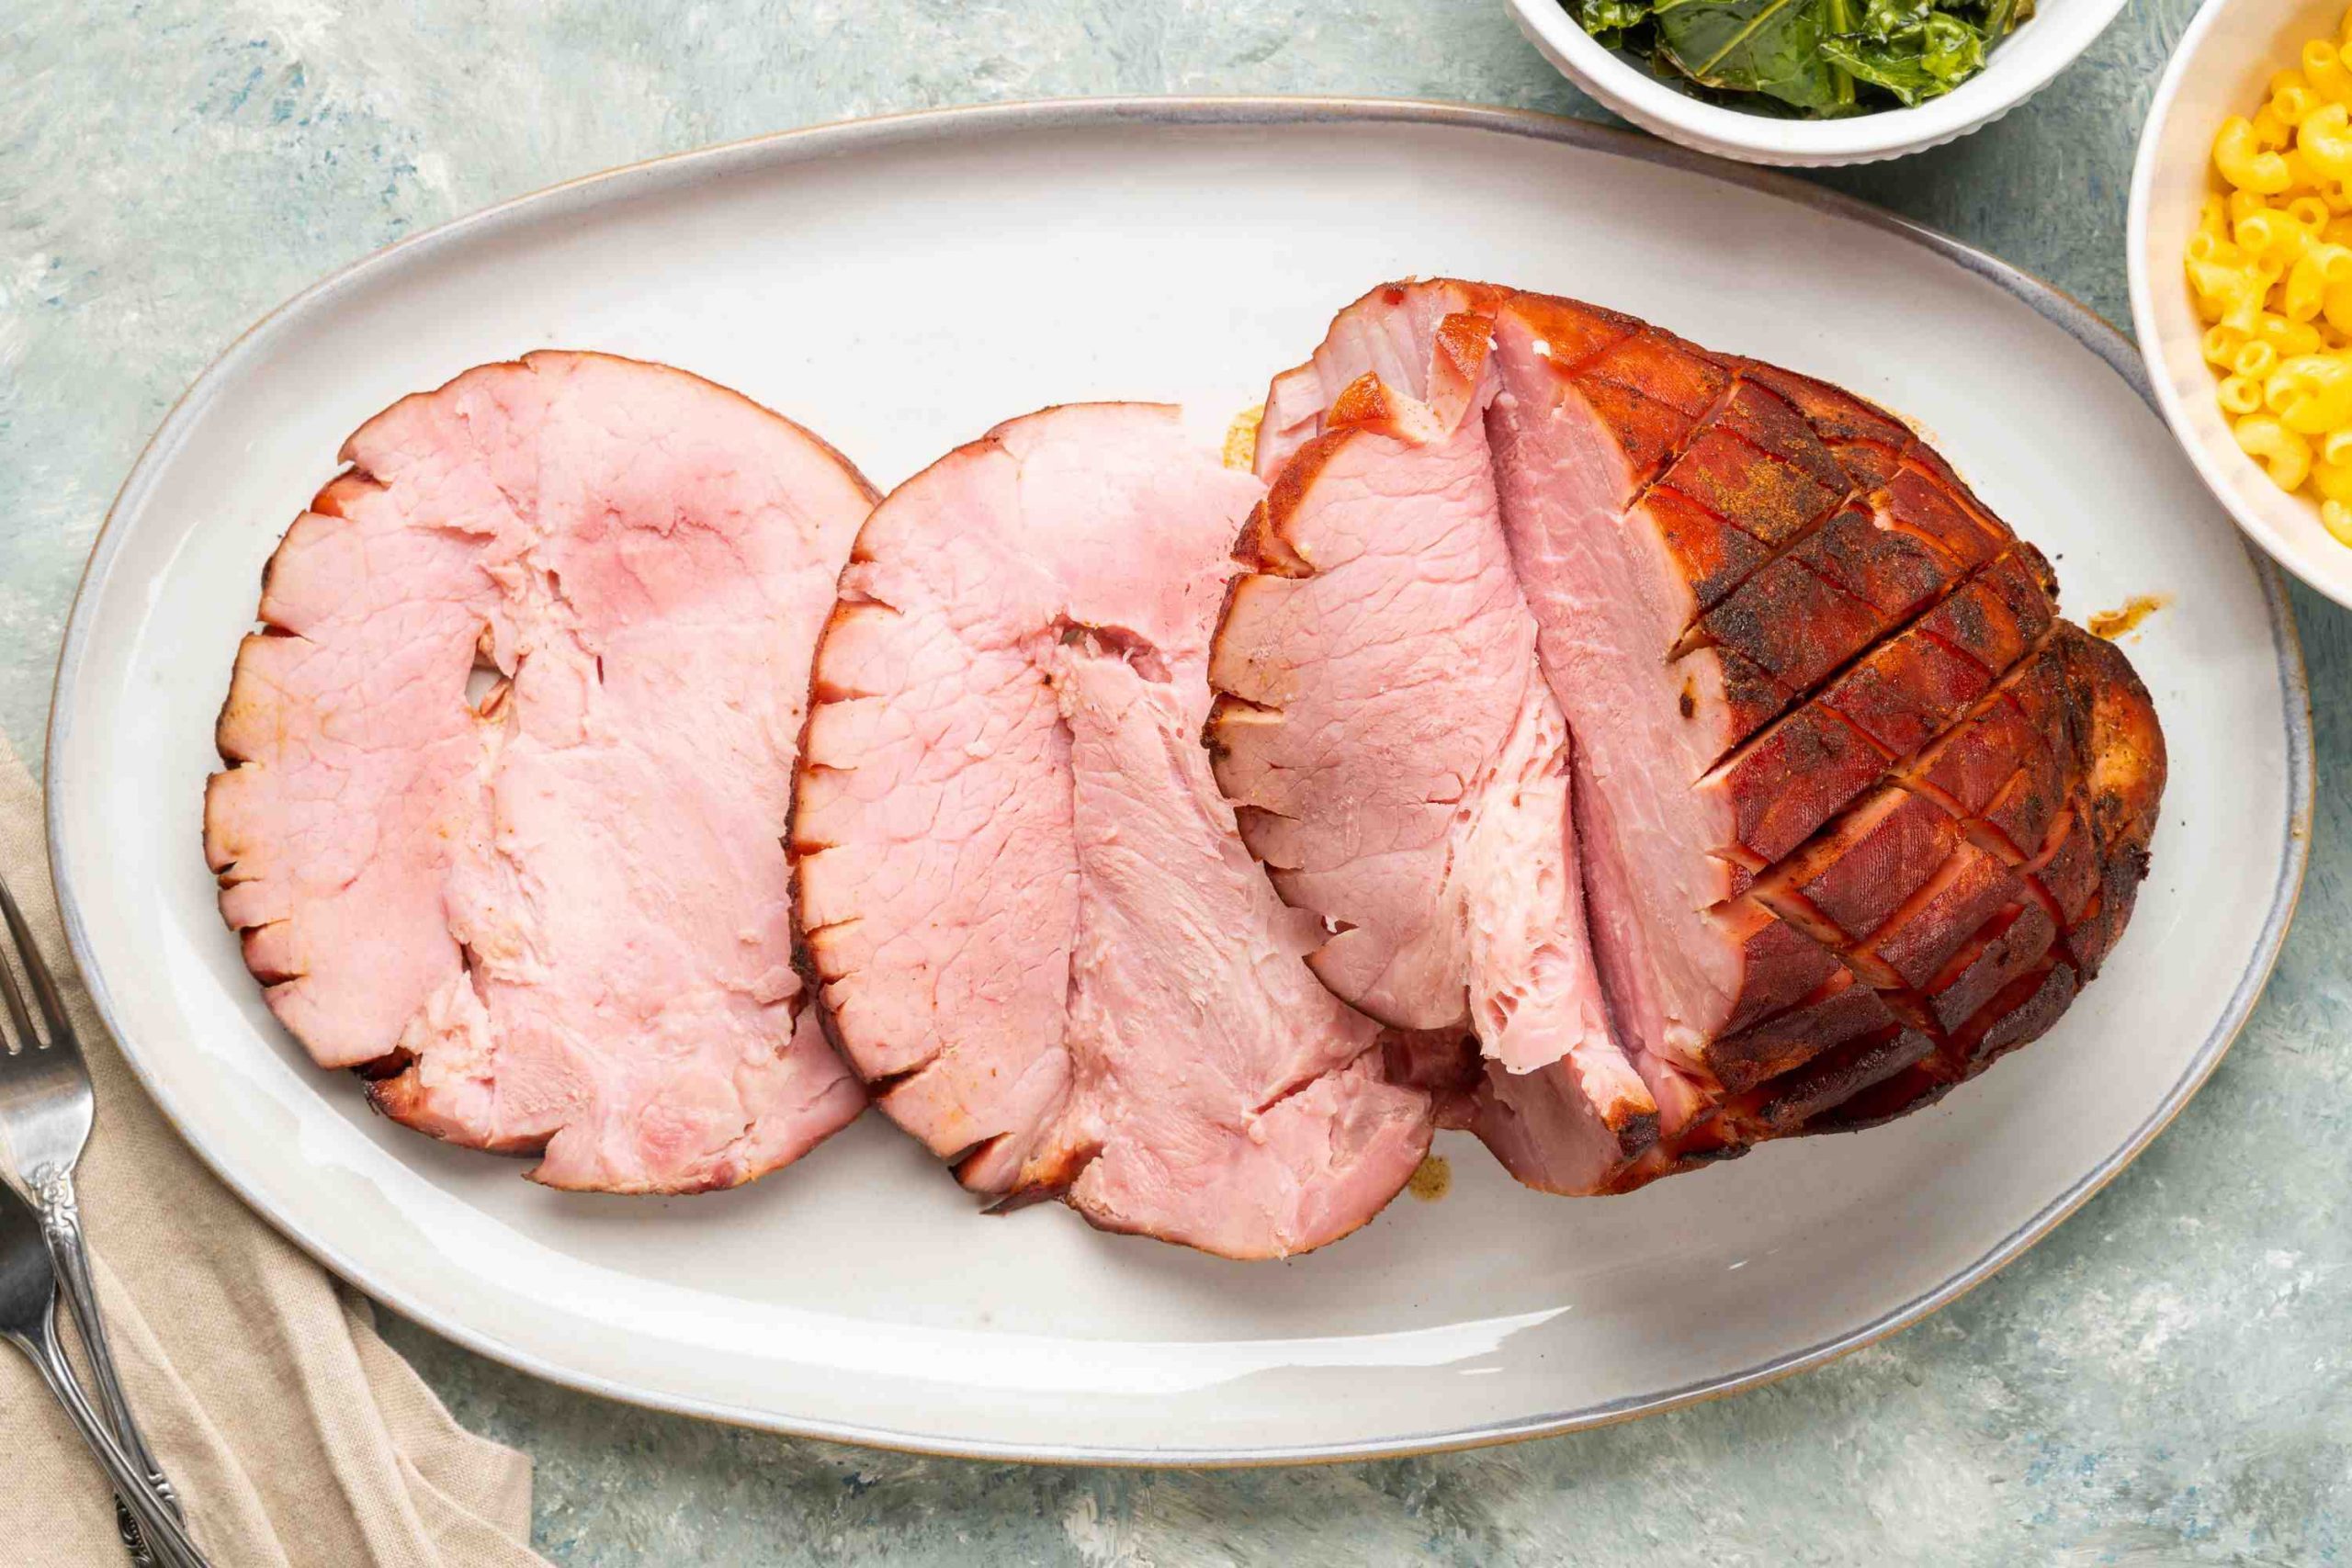 Are ham healthy for you?